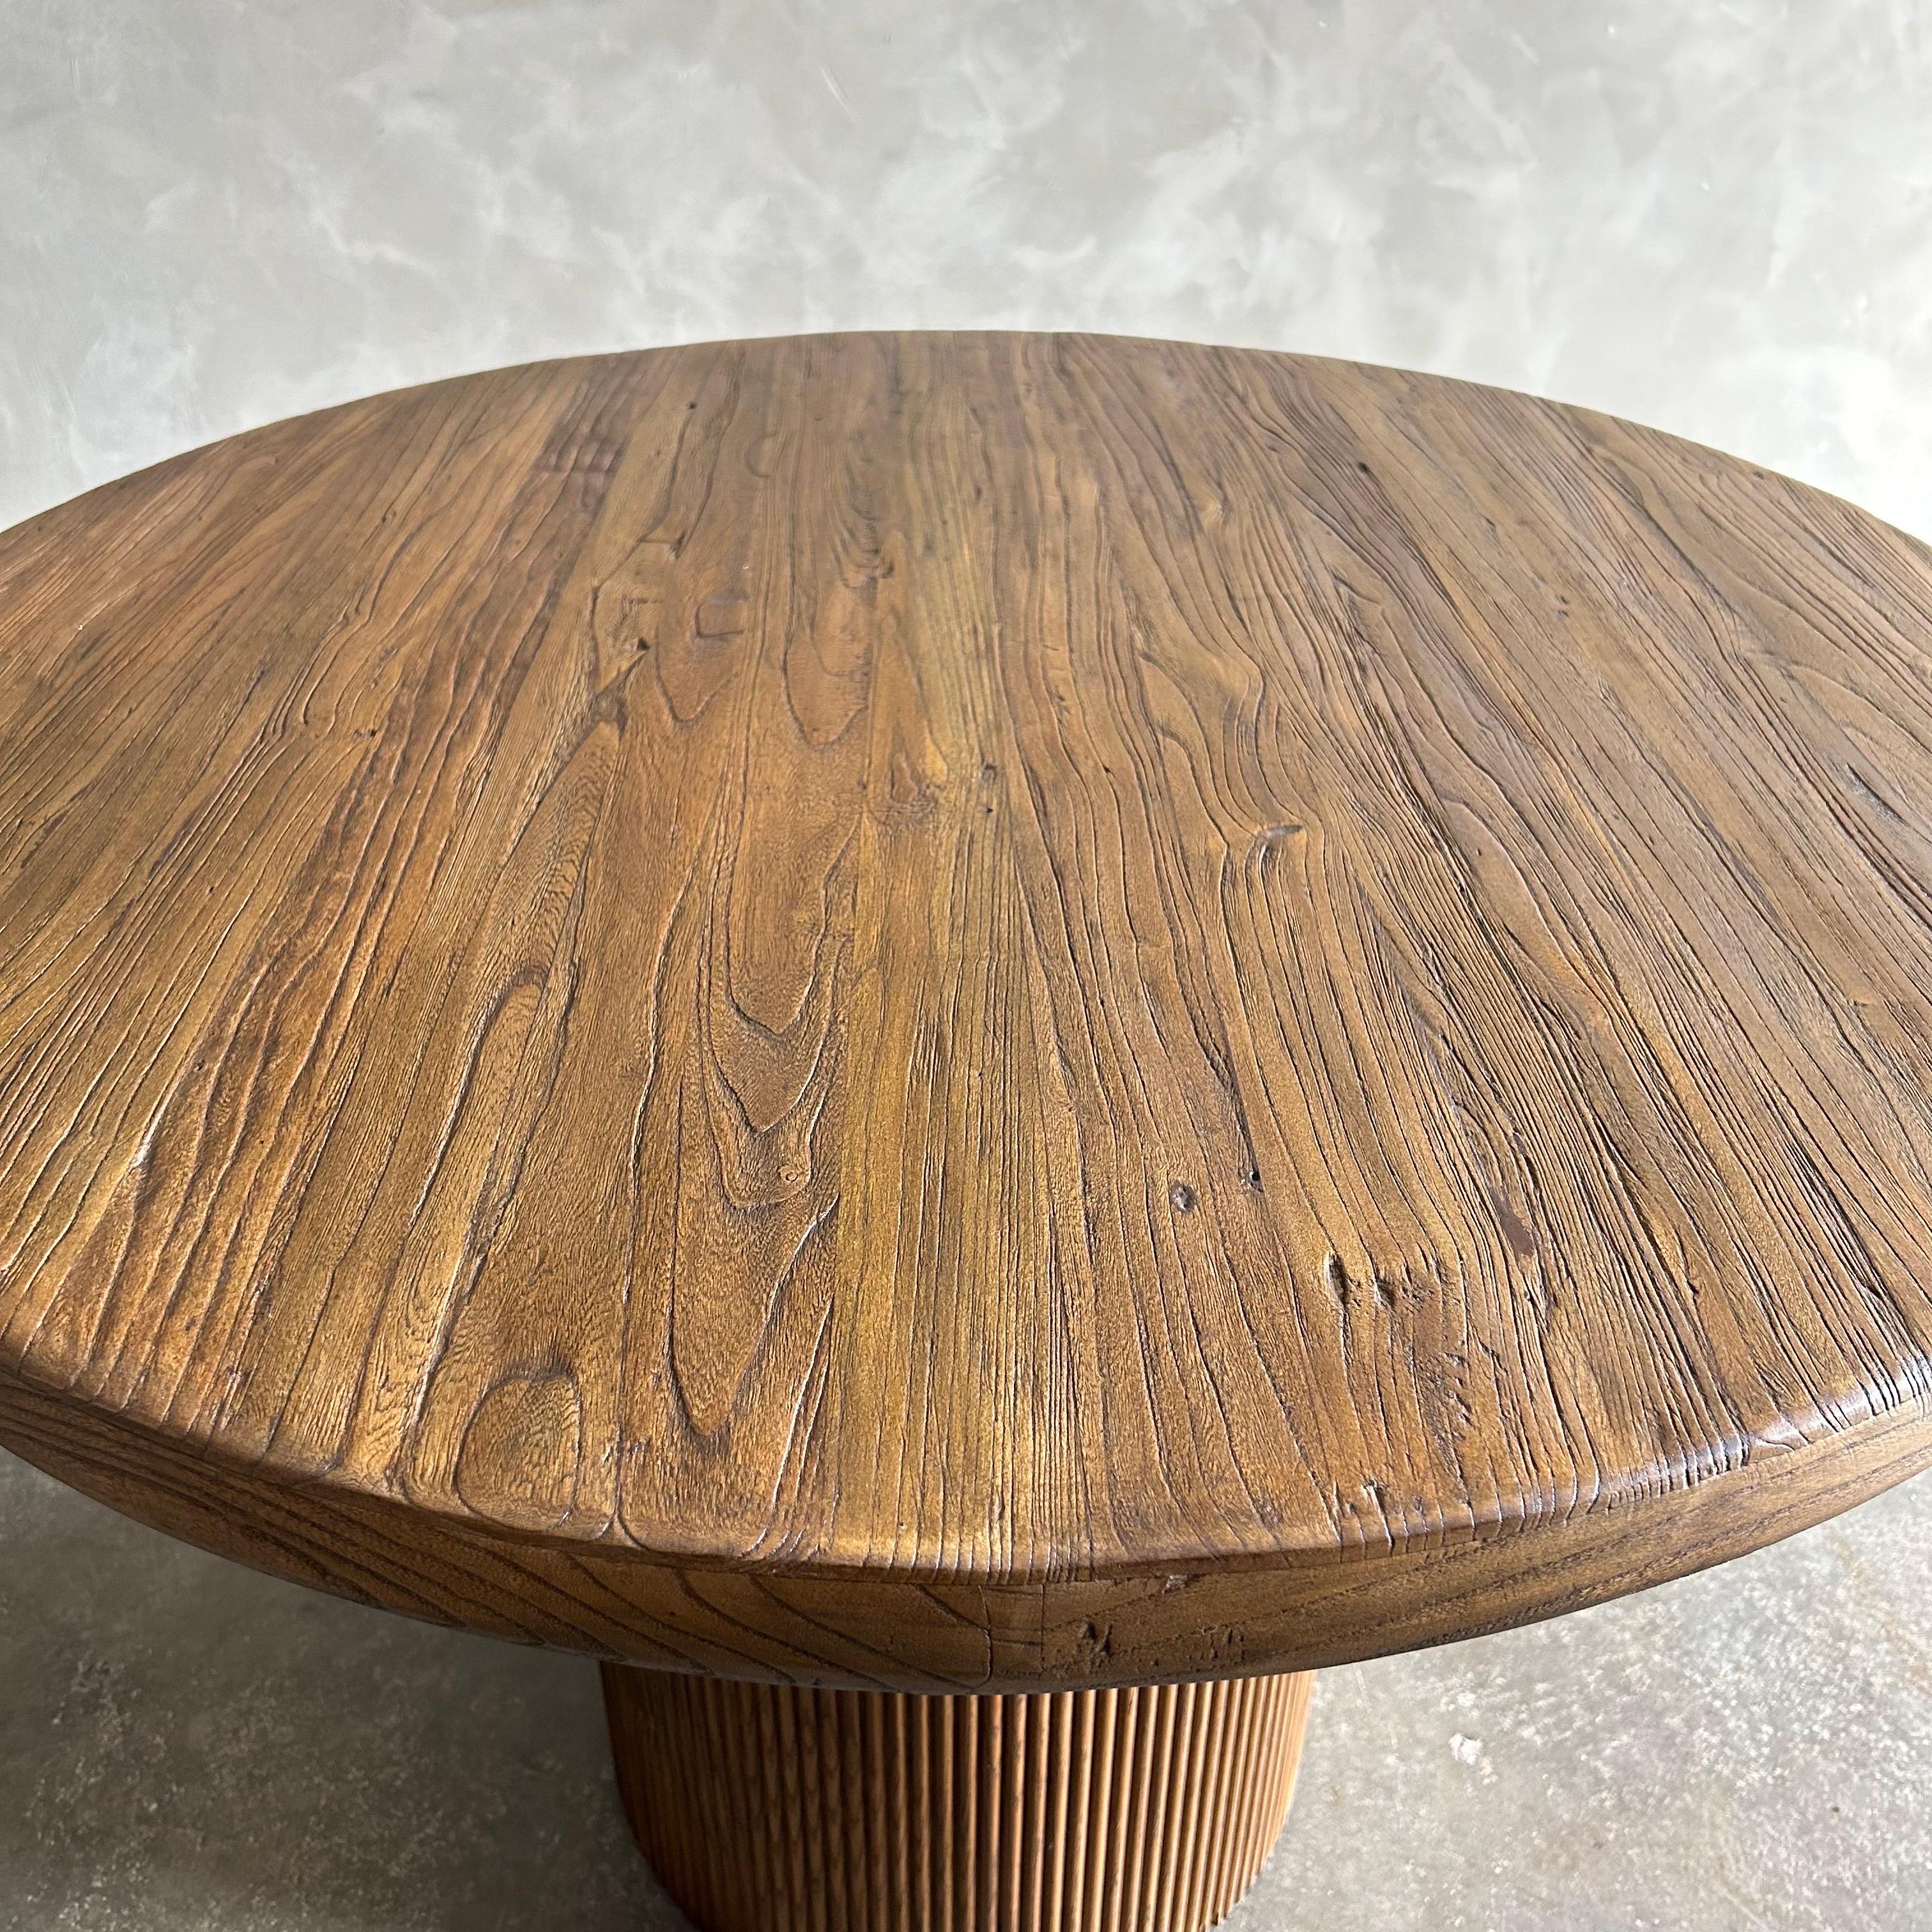 Elm Reclaimed Wood Round Reeded Base Dining Table in Dark Walnut Finish